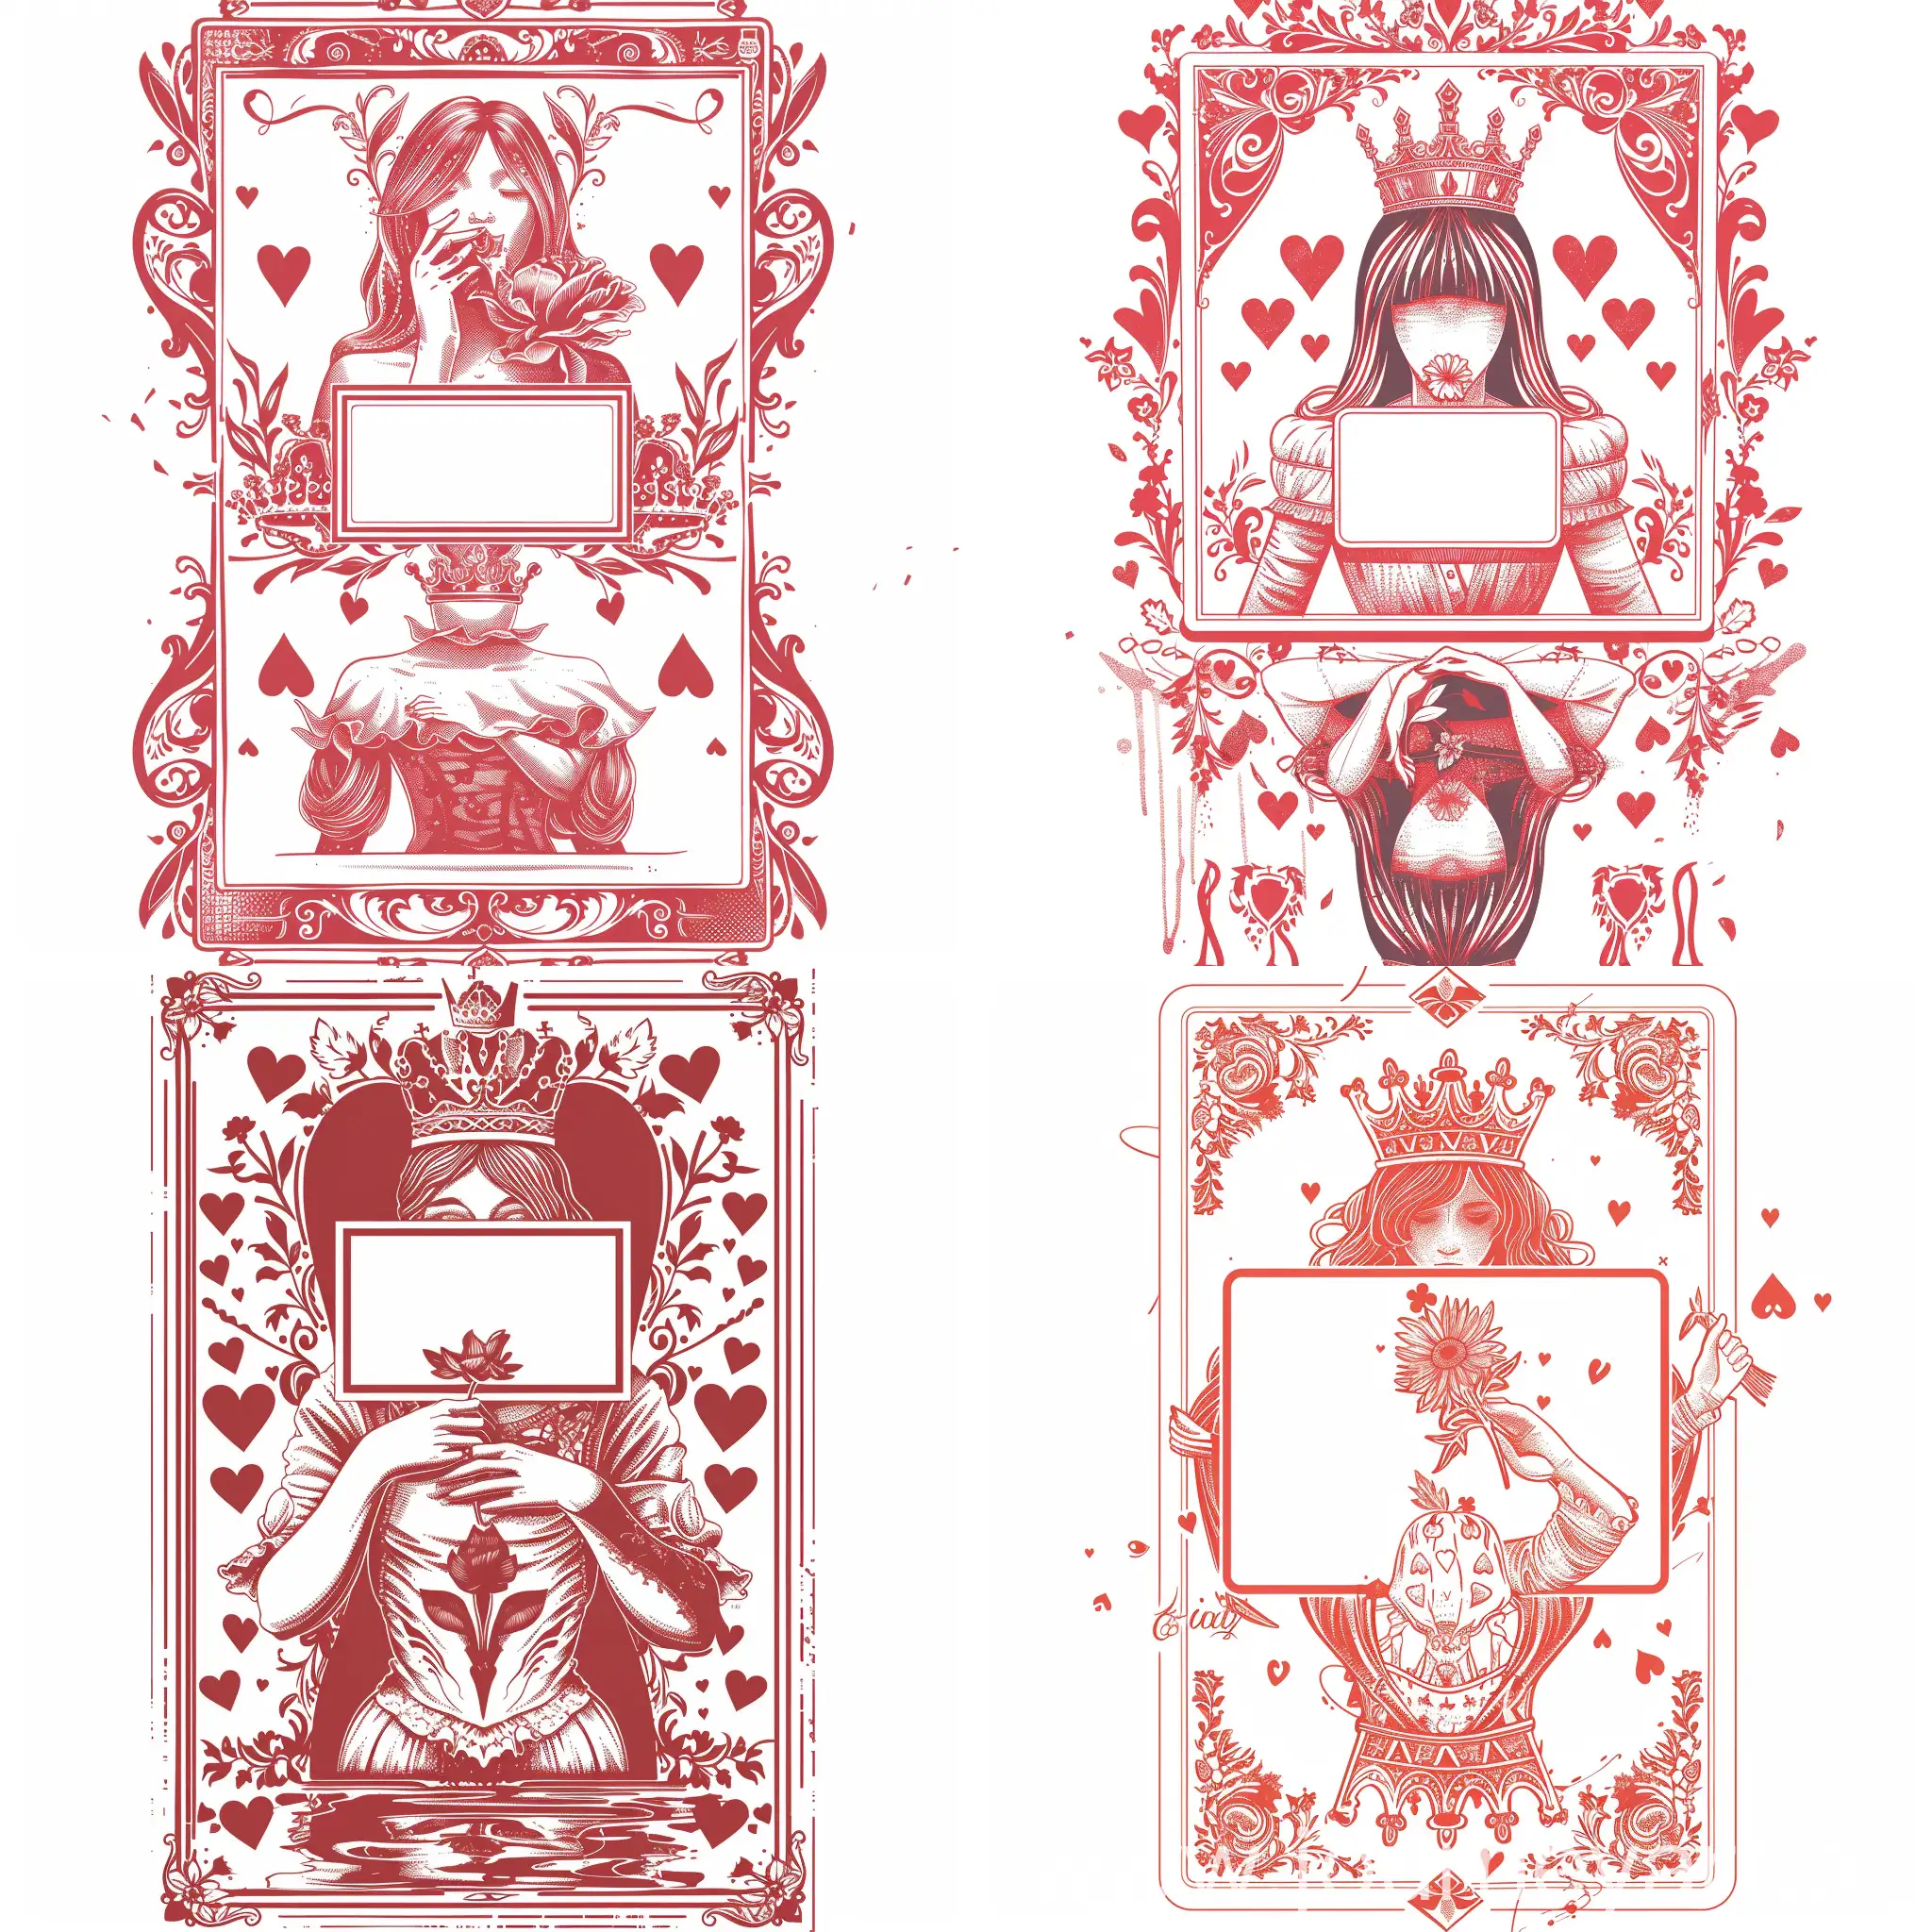 a stylized representation of a playing card, specifically the Queen of Hearts. The central figure is depicted in a seated position, holding a flower close to their face. However, their identity is obscured by a blank rectangle. A smaller, upside-down figure mirrors the larger one below it. Both figures are adorned with crowns and are surrounded by decorative elements including hearts and floral designs. The color scheme consists of red illustrations against a white background